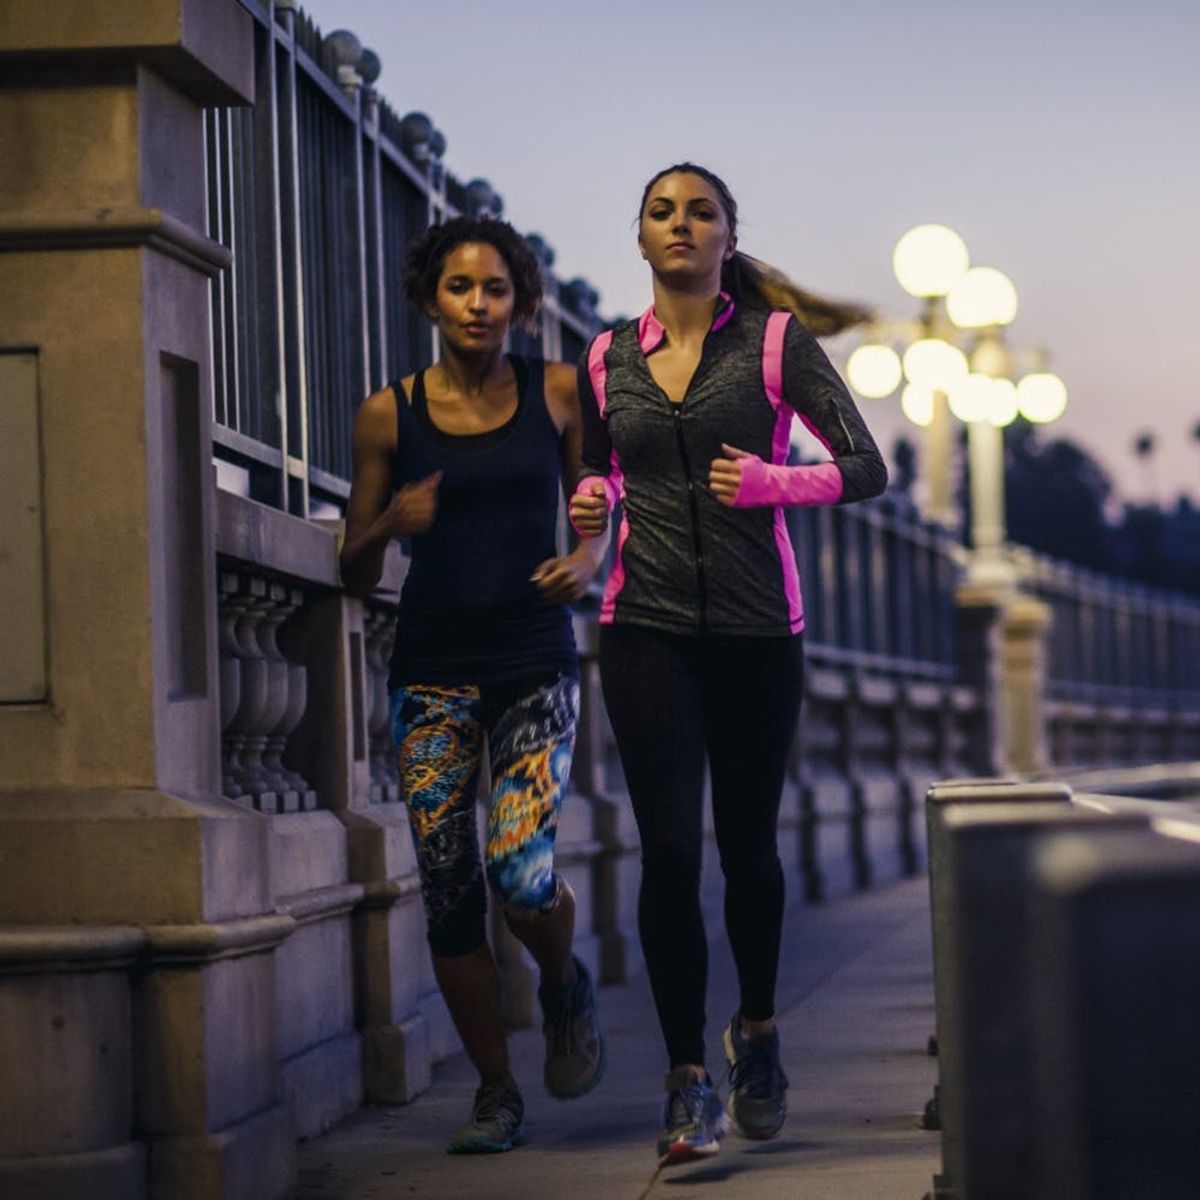 7 Tips for Running Safely at Night